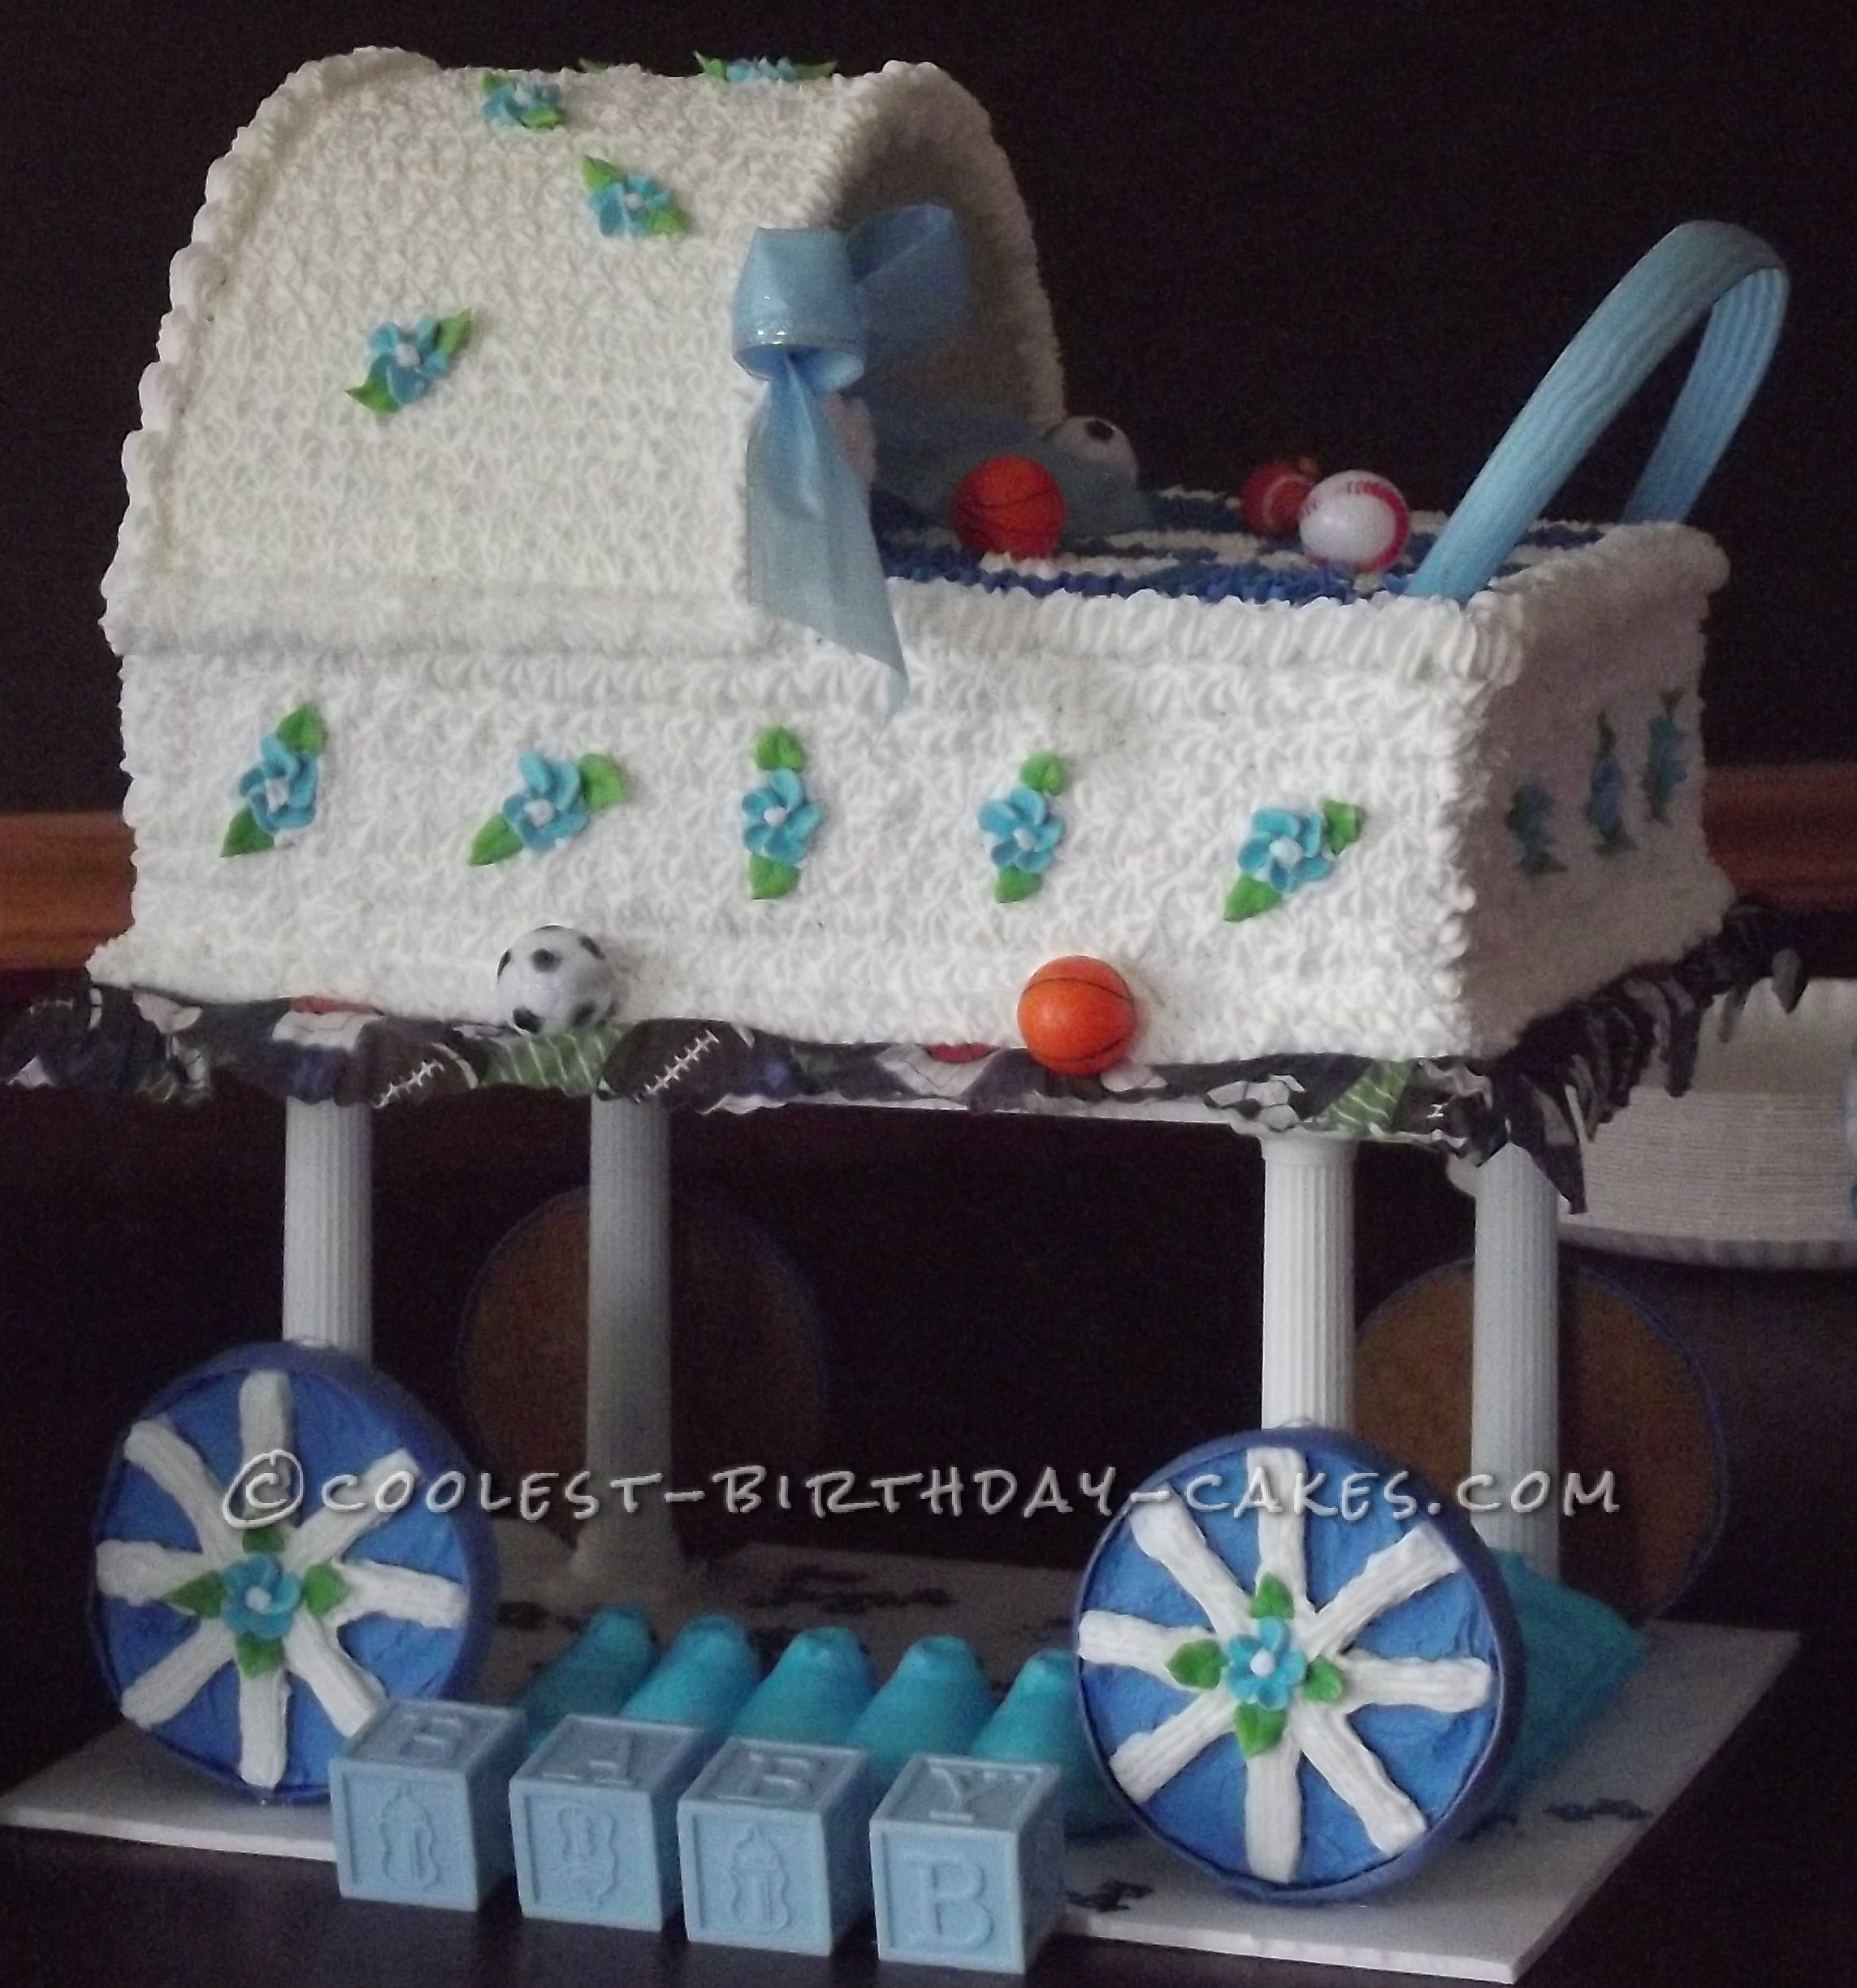 Special Baby Carriage Cake for a Special Mommy-To-Be